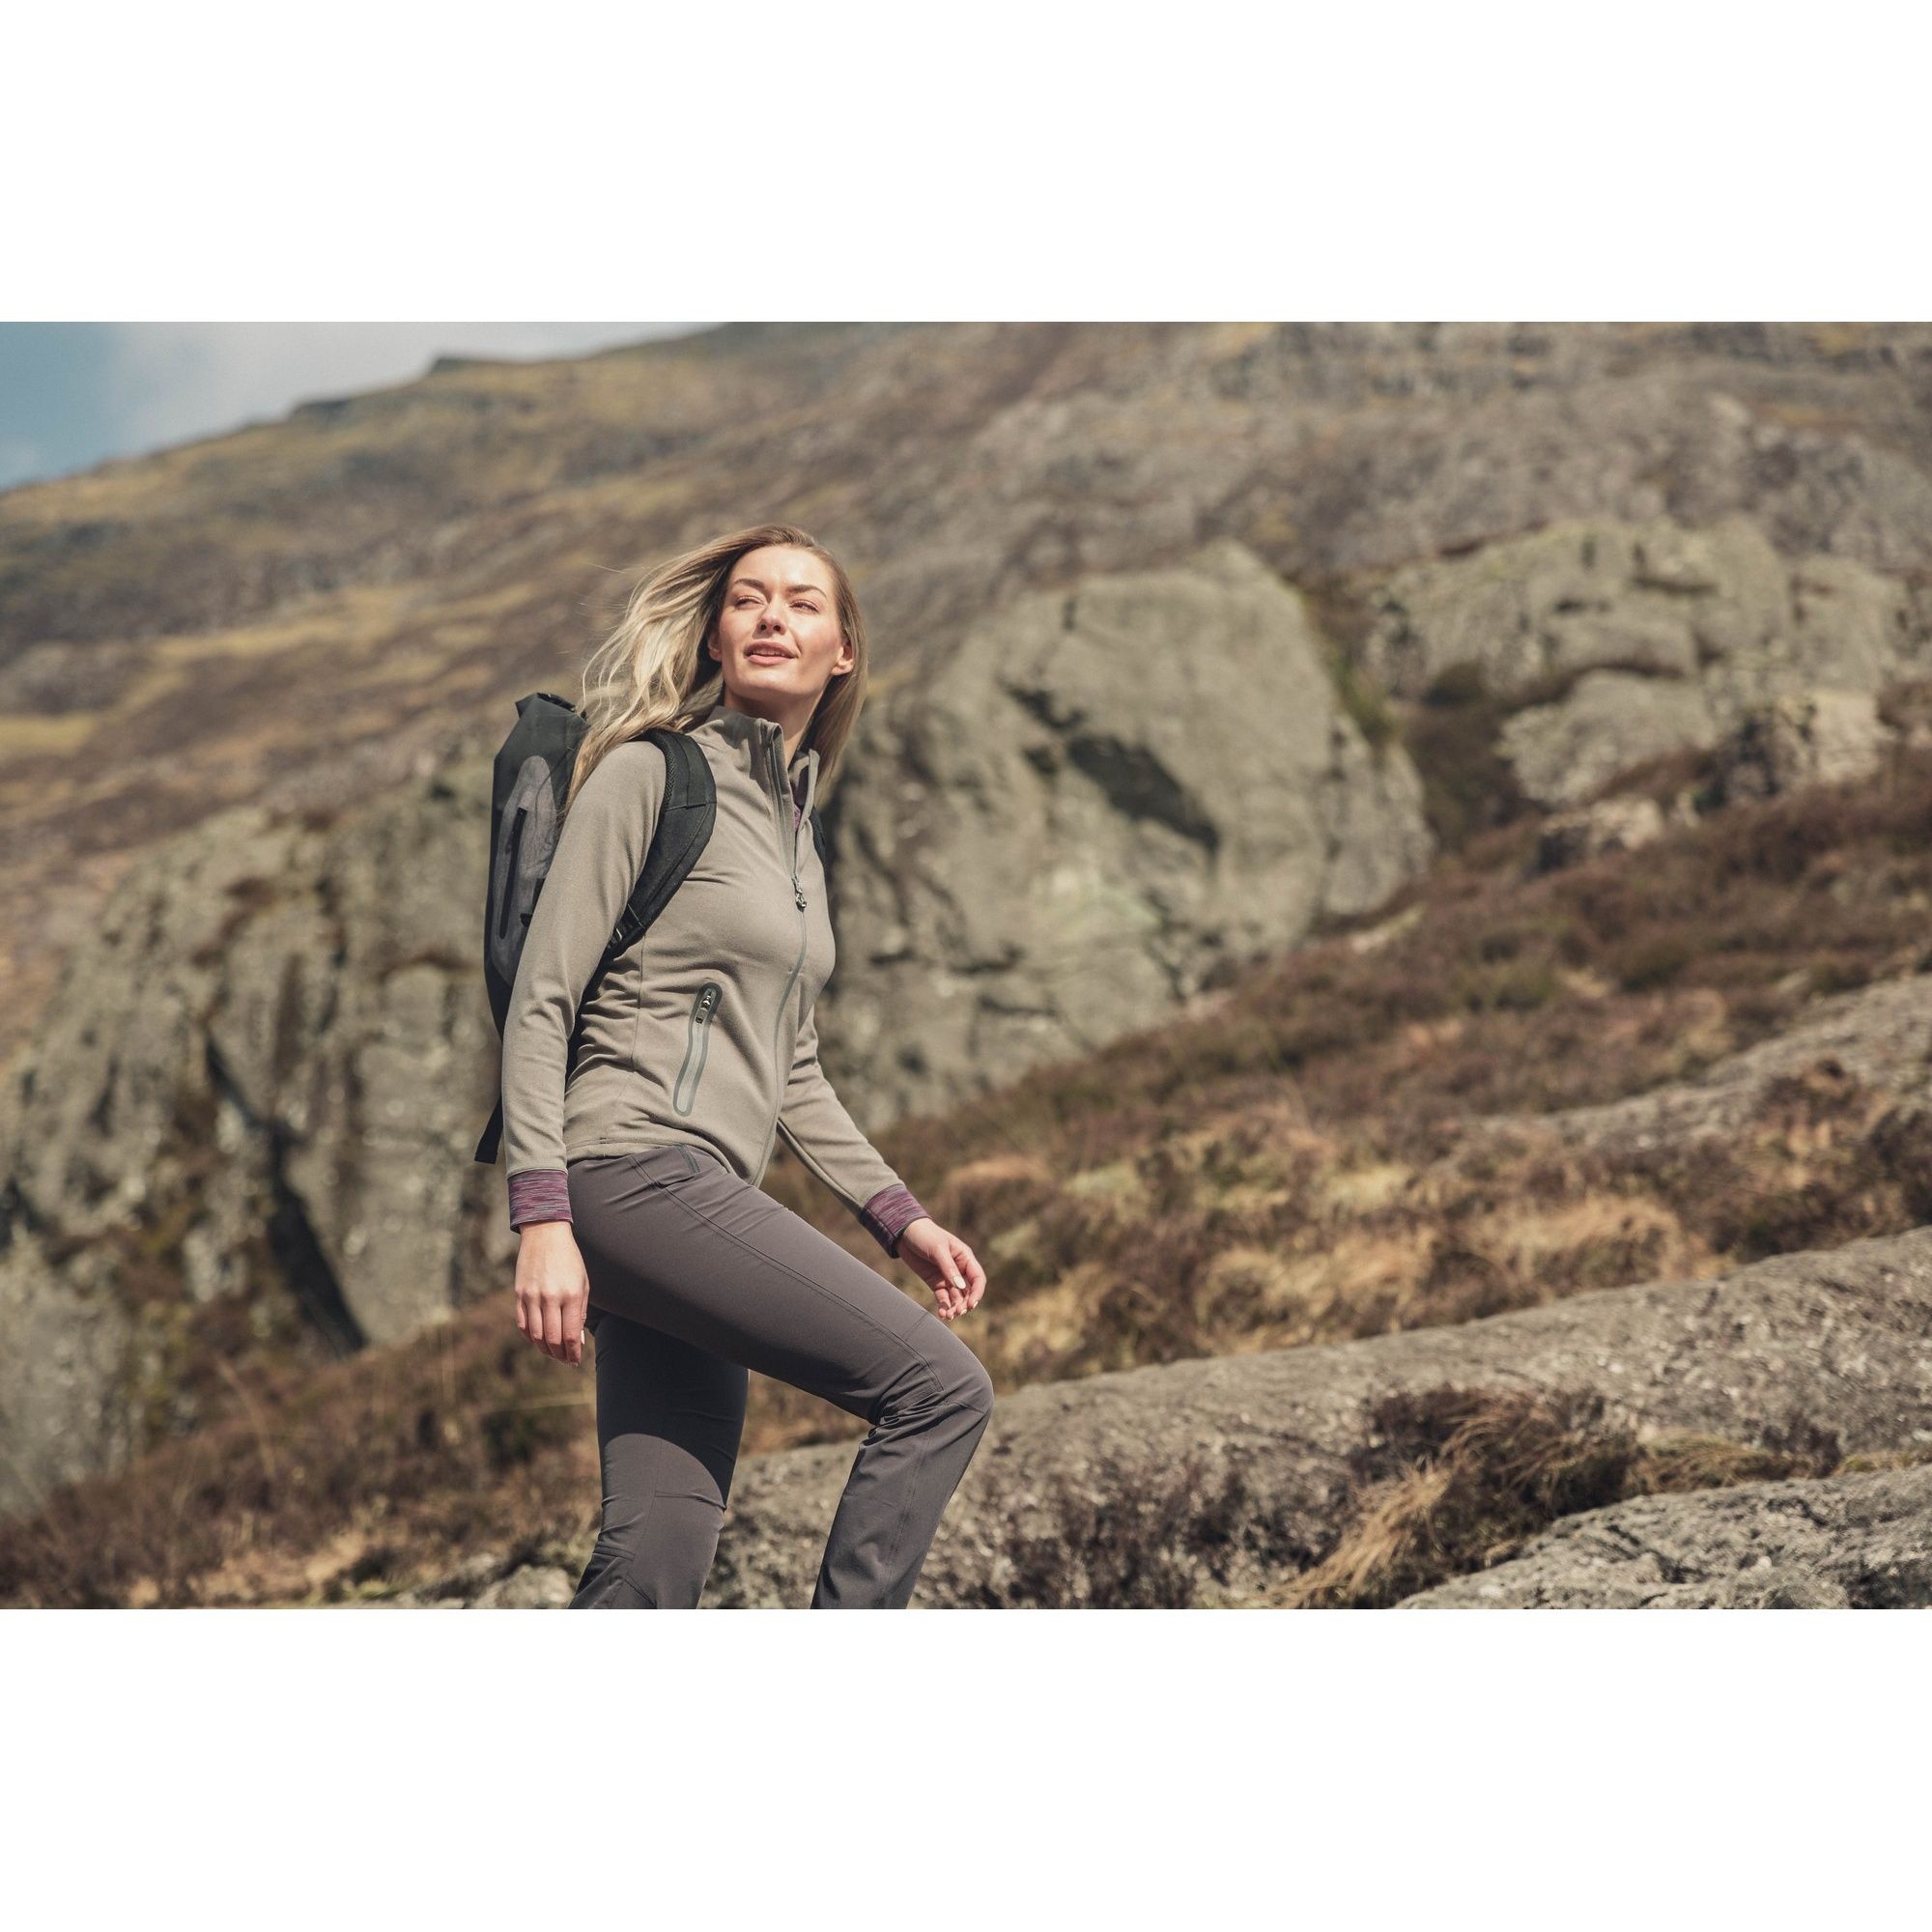 85% Polyamide, 15% Elastane. Elasticated waistband with button fastening. Front zipped fly opening. 2 zipped pockets at front. Detachable stripe webbing belt. 2 zipped pockets at back. Articulated knee darts. Trespass Womens Waist Sizing (approx): XS/8 - 25in/66cm, S/10 - 28in/71cm, M/12 - 30in/76cm, L/14 - 32in/81cm, XL/16 - 34in/86cm, XXL/18 - 36in/91.5cm.